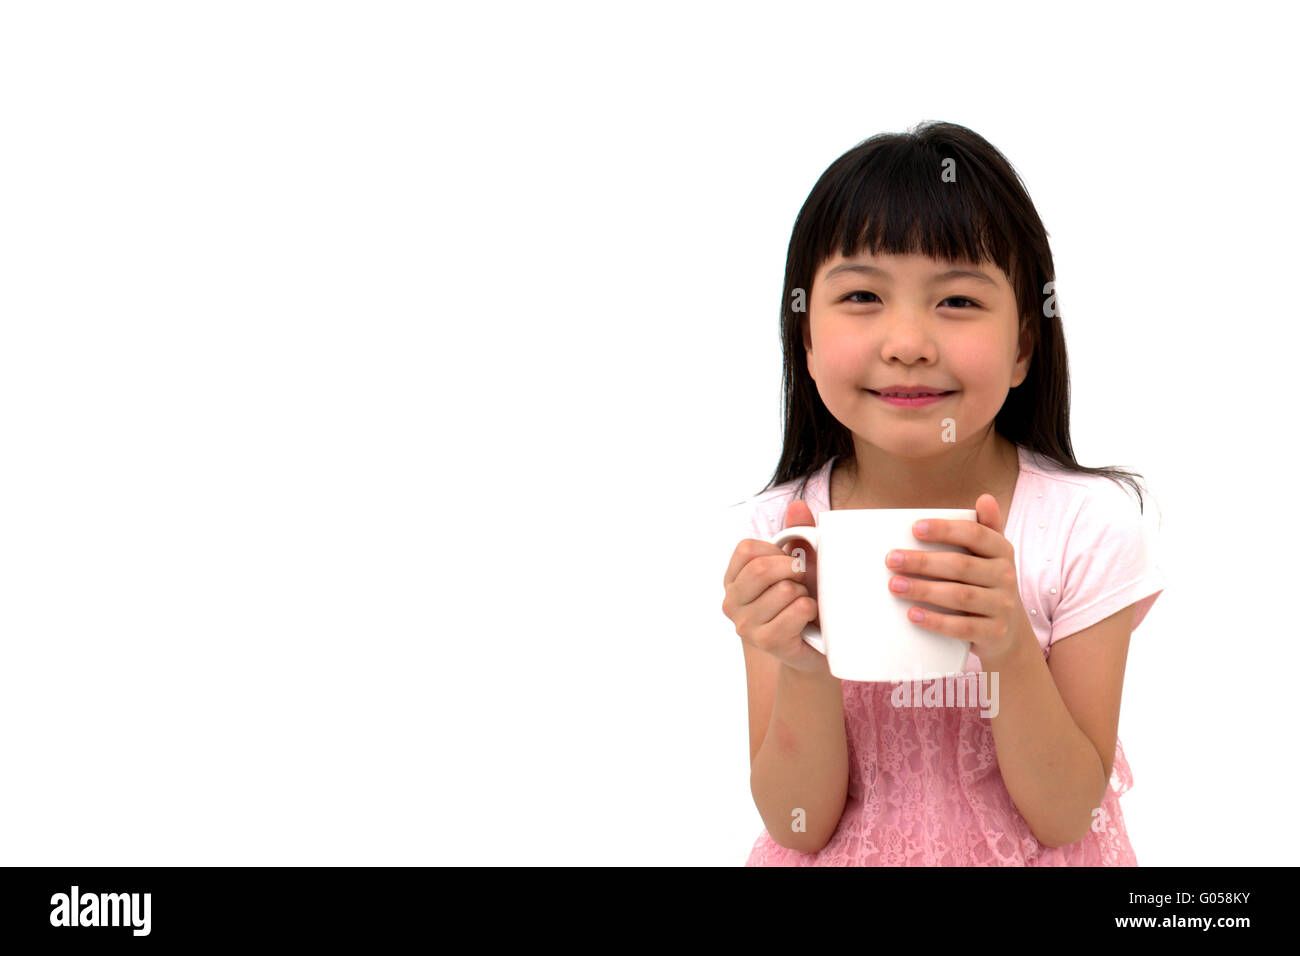 Do you want a cup of milk with me? Stock Photo